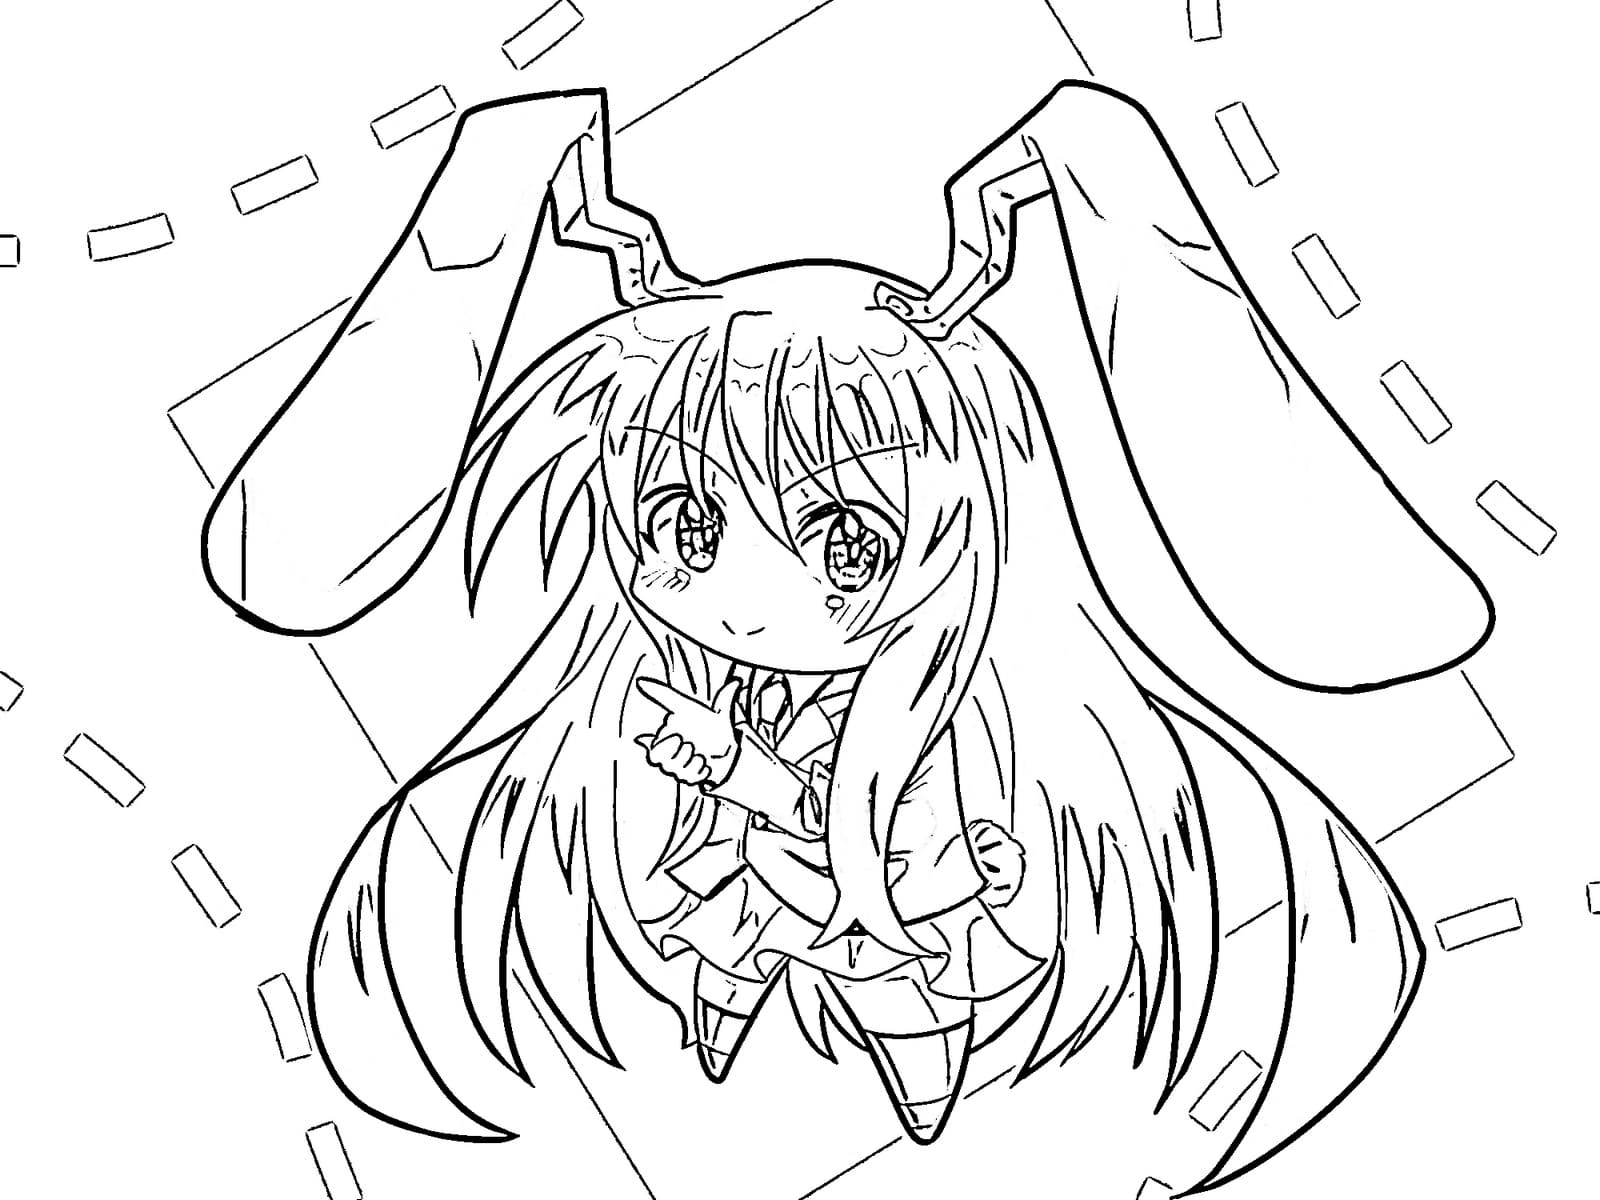 Coloring page Chibi A girl with bunny ears